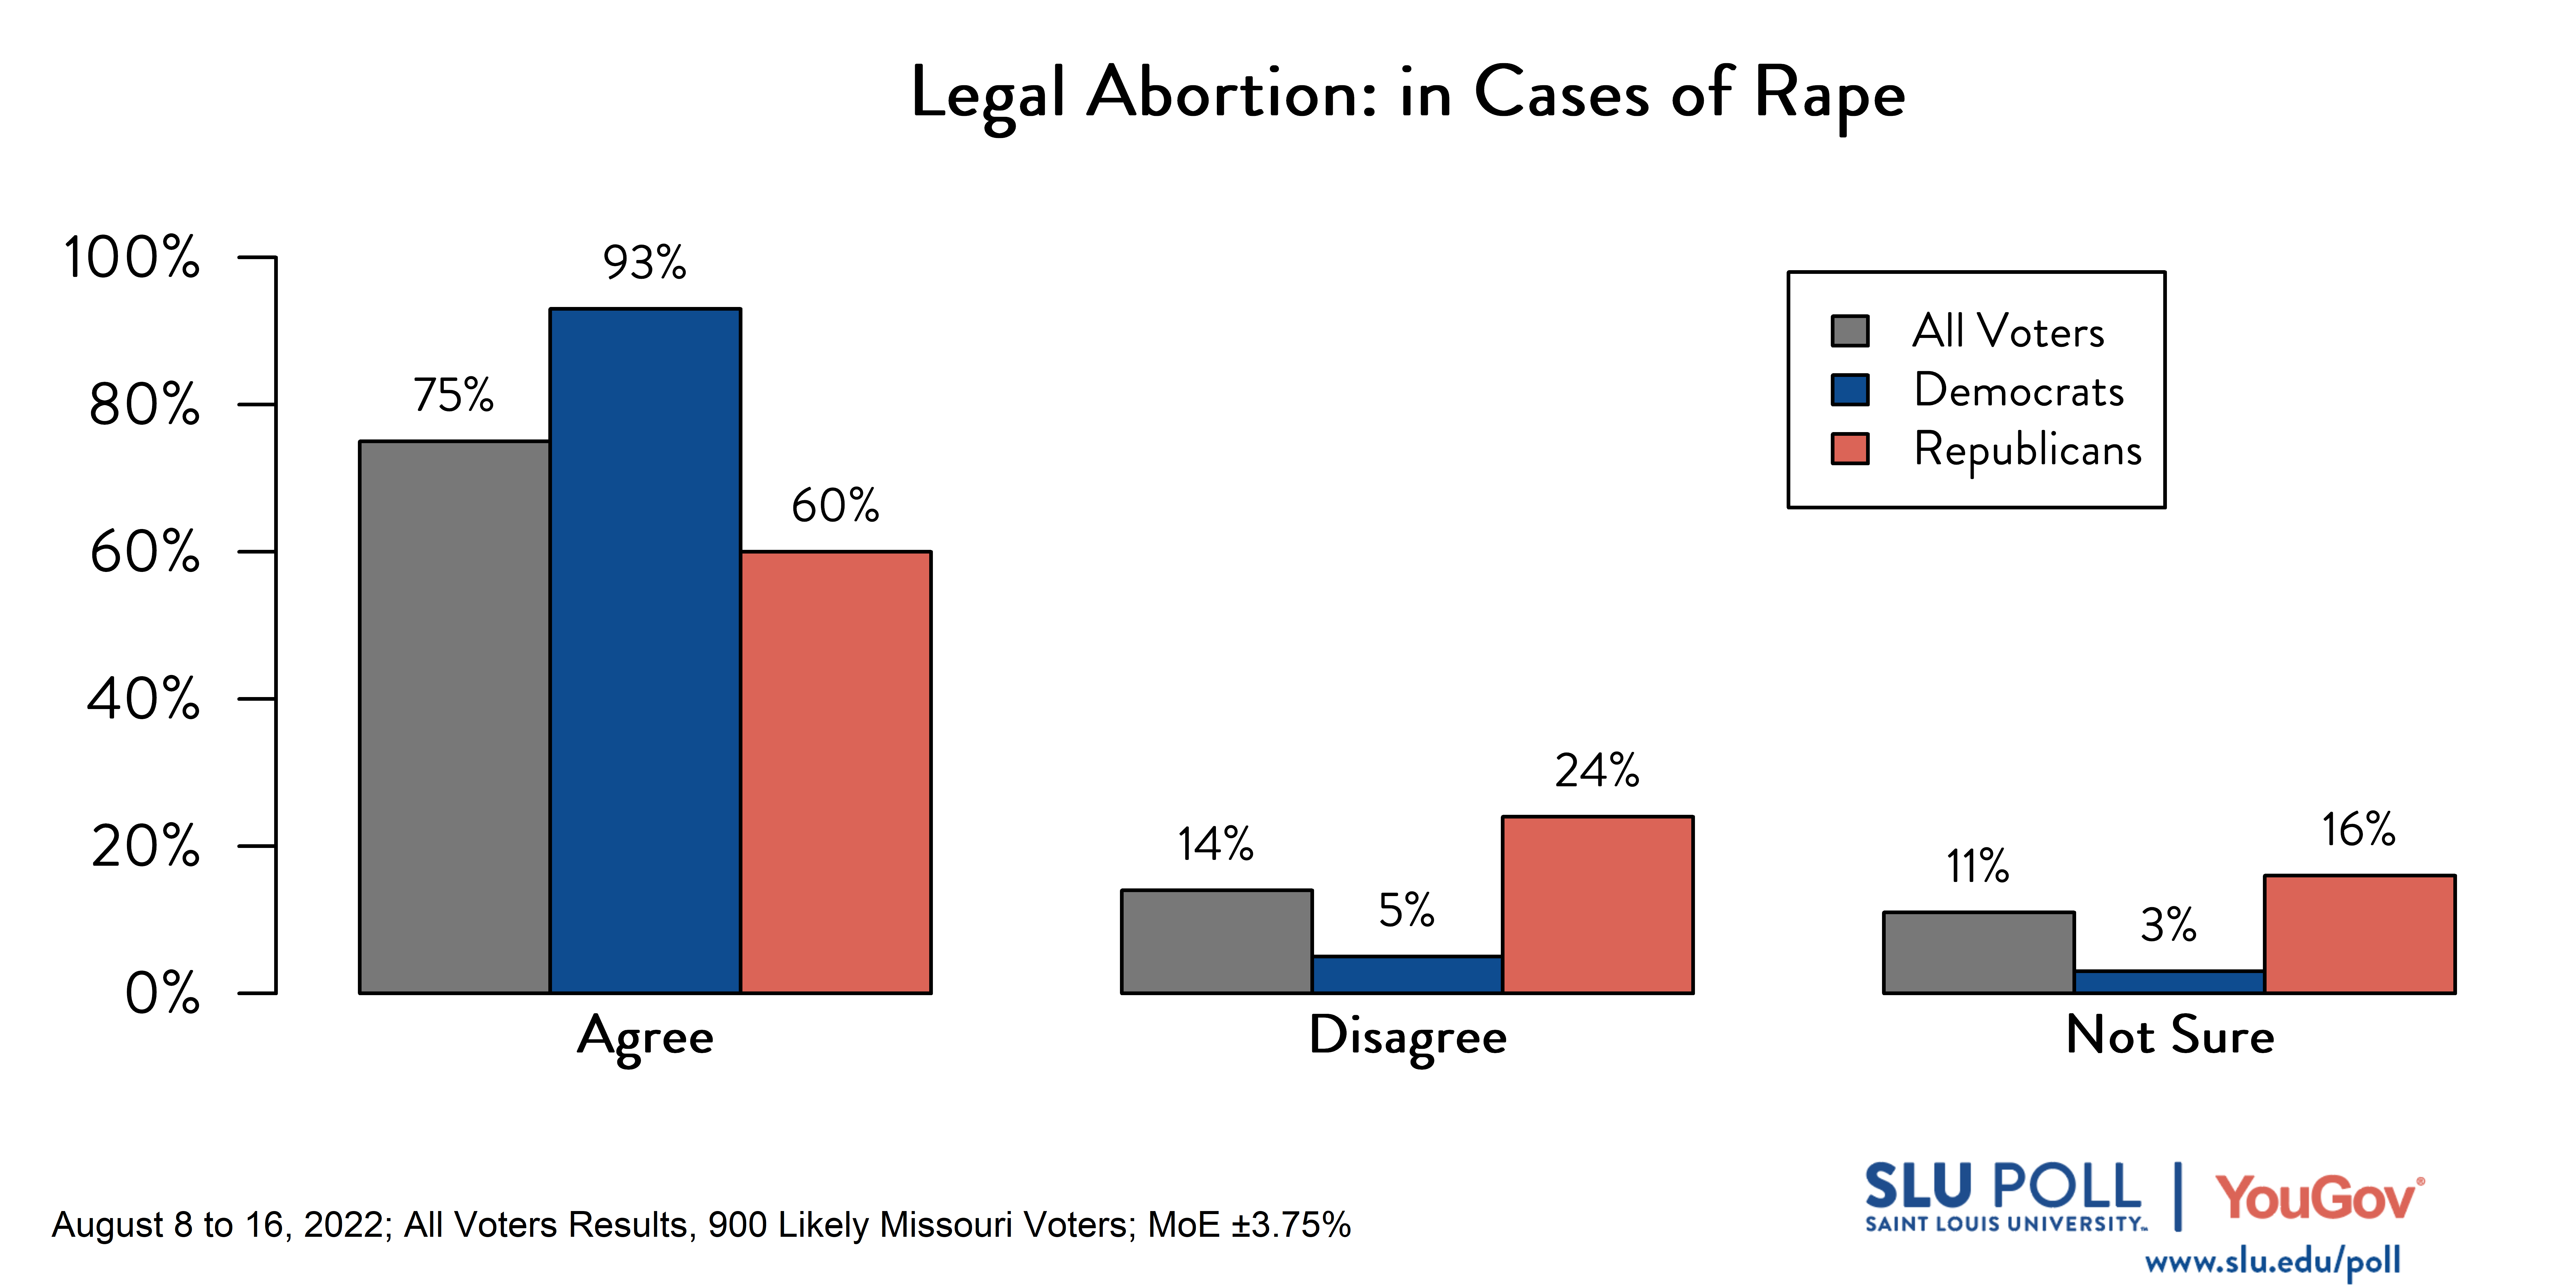 Likely voters' responses to 'Do you think it should be possible for a woman to legally obtain an abortion in the state of Missouri: in cases of rape?': 75% Agree, 14% Disagree, and 11% Not Sure. Democratic voters' responses: ' 93% Agree, 5% Disagree, and 3% Not Sure. Republican voters' responses: 60% Agree, 24% Disagree, and 16% Not Sure. 